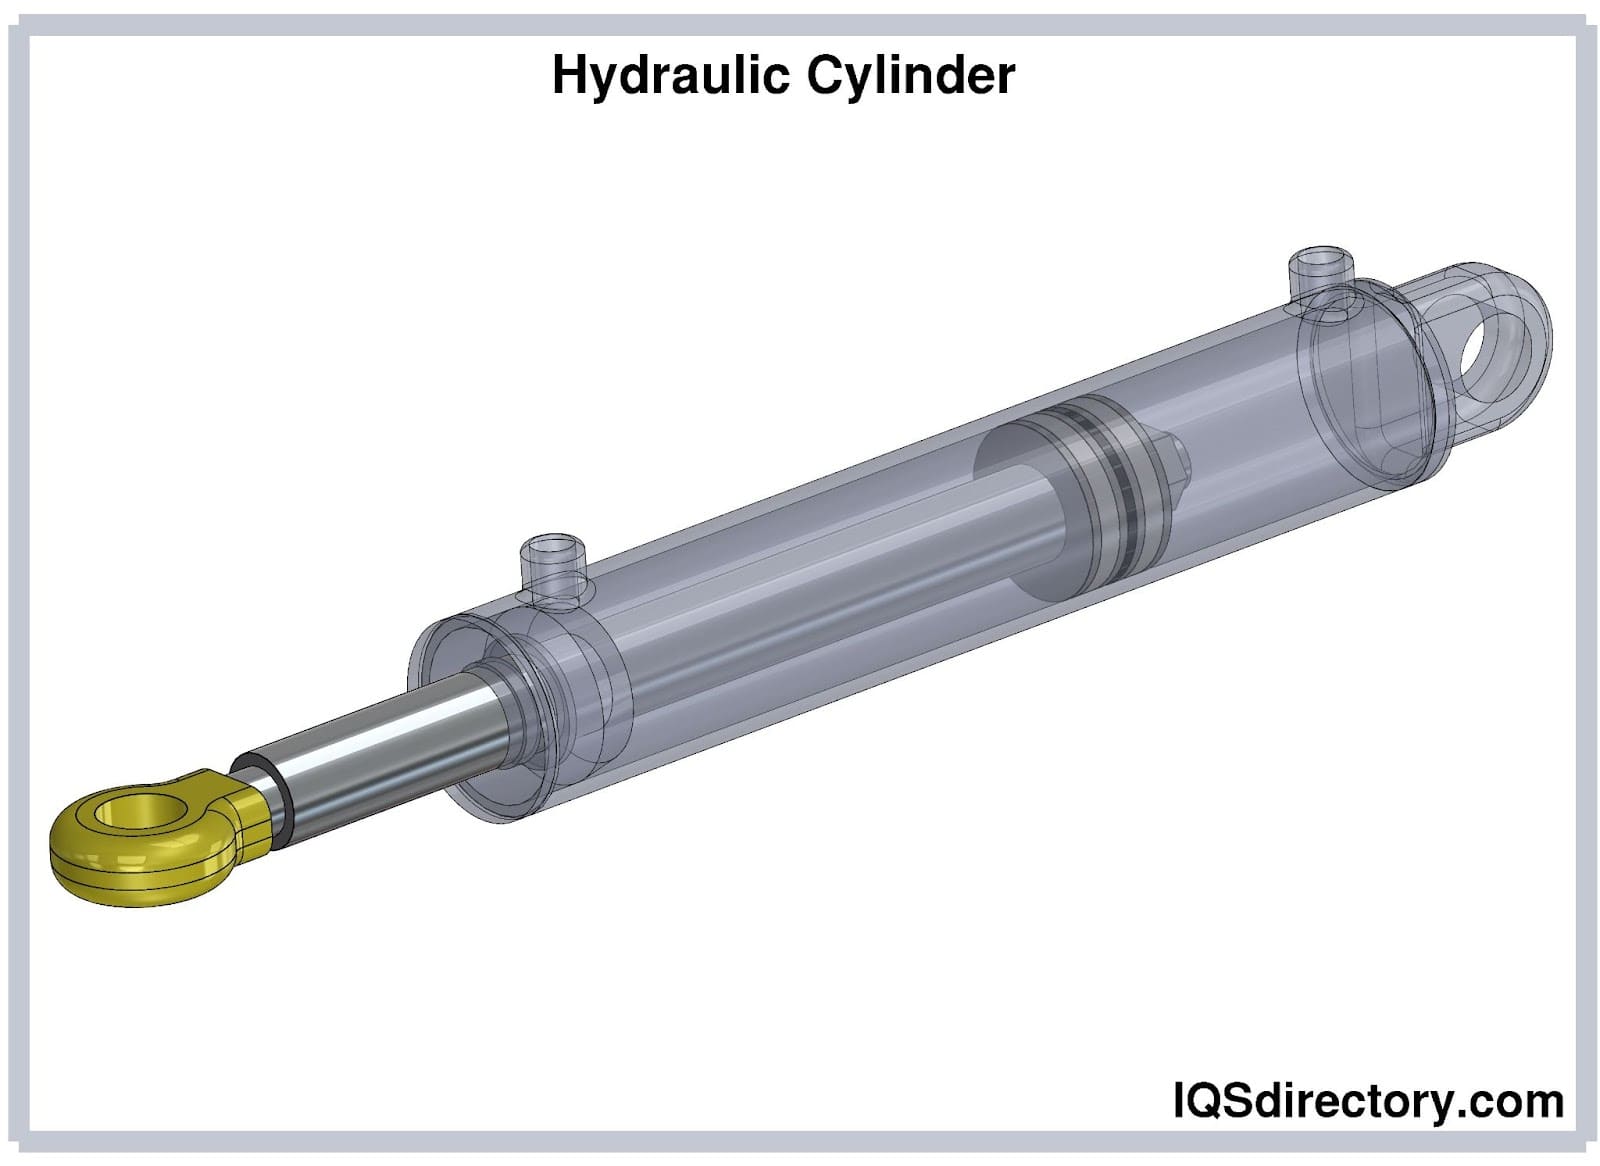 Hydraulic Cylinders: Types, Design, Applications and Piston Configuration